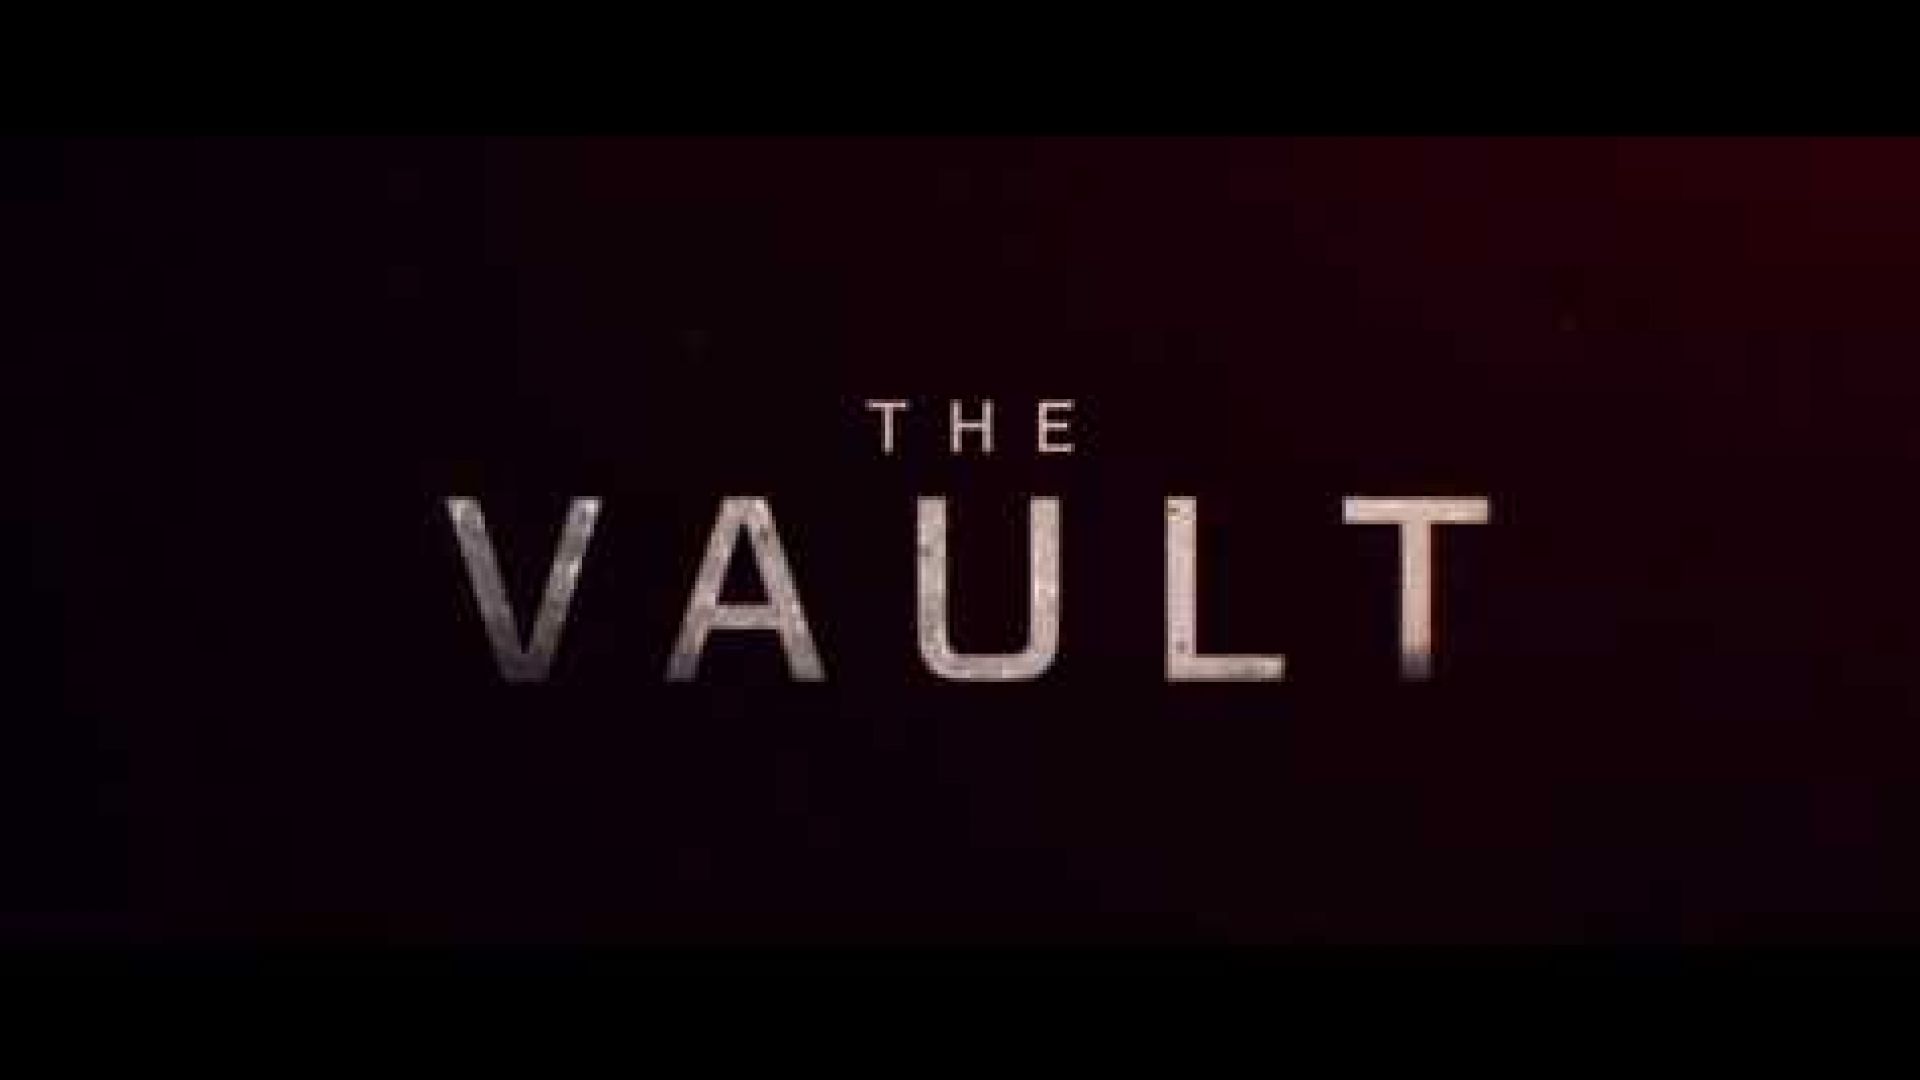 The Vault is directed by Dan Bush (The Signal) and co-stars 